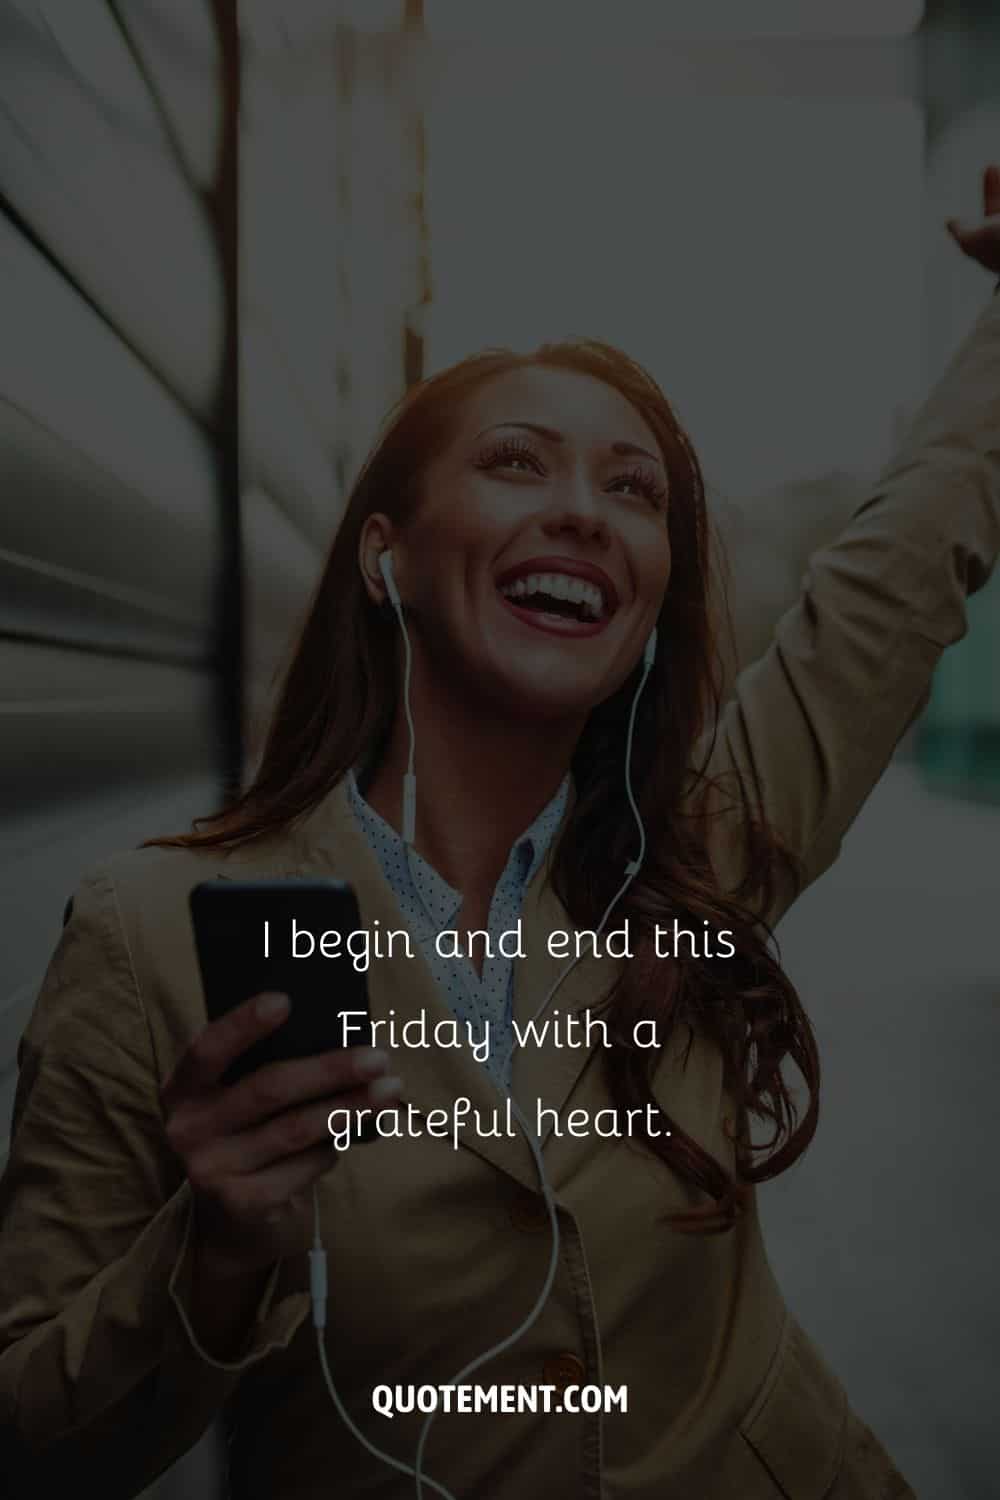 Image of a woman smiling representing a Friday affirmation.